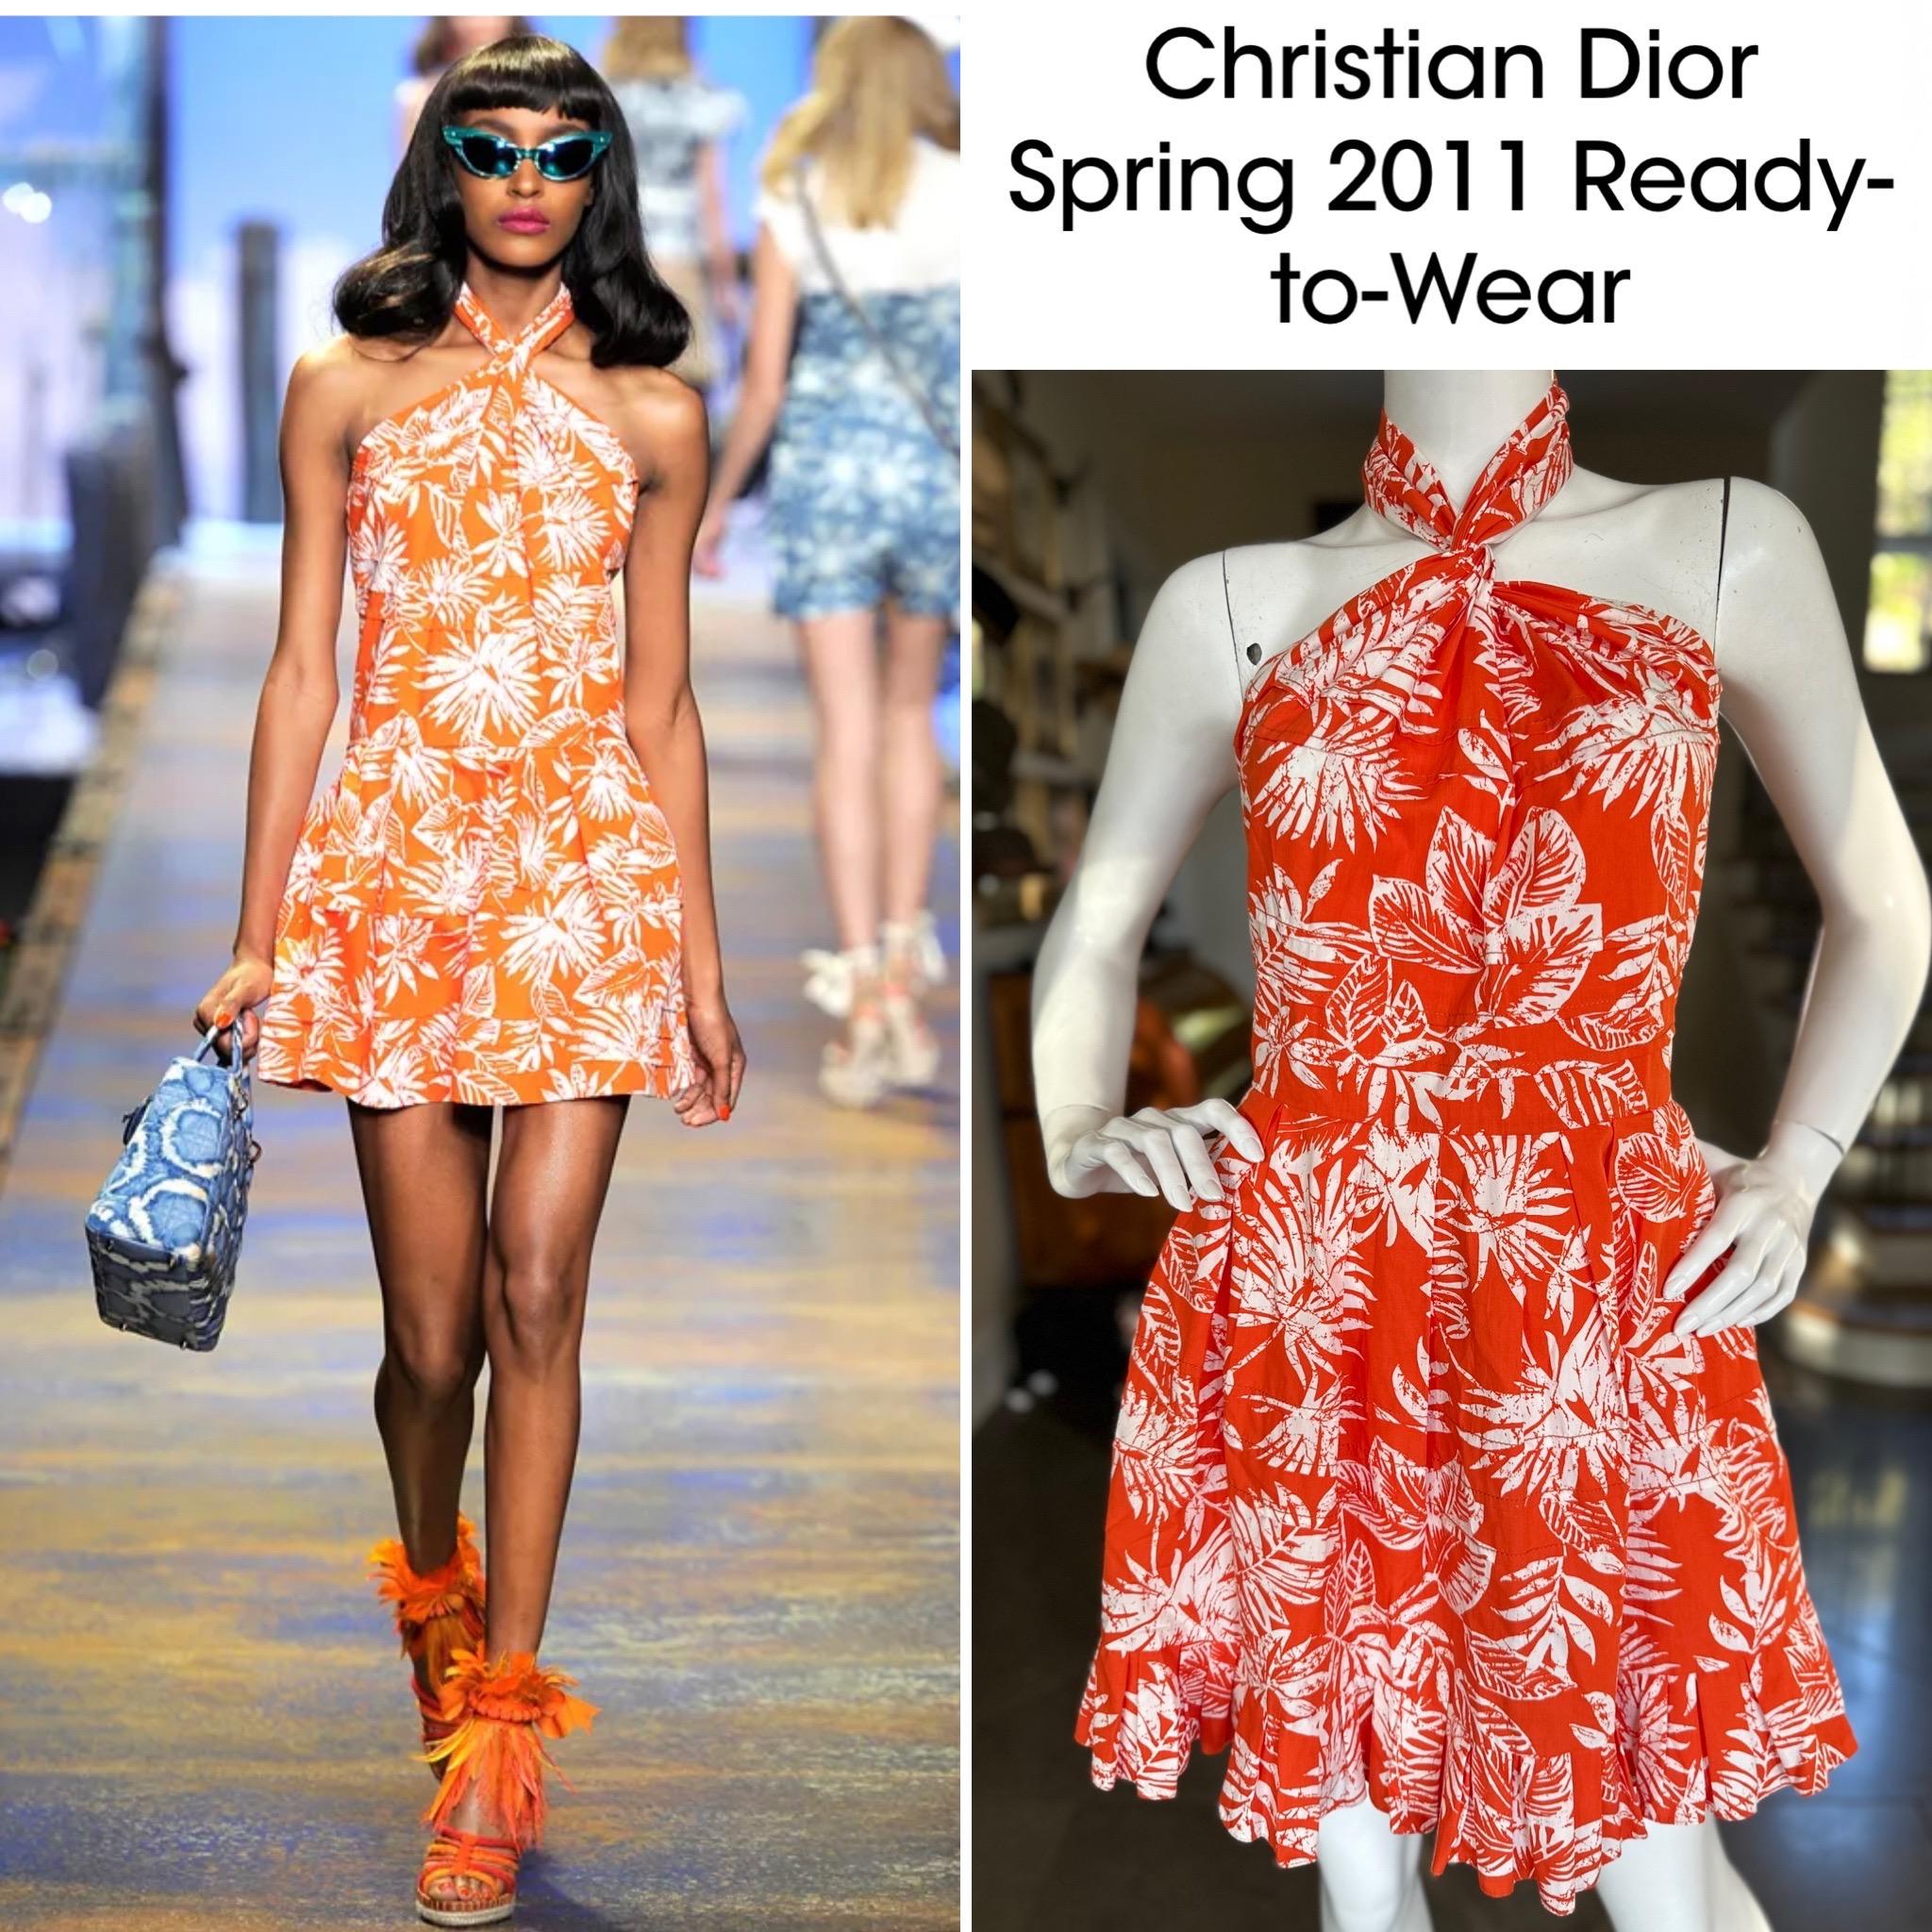 Christian Dior Spring Summer 2011 by John Galliano Cotton Sun Dress.
Bold flowers , this is such a joyous dress.
Galliano was interviewed by Tim Blanks for Style dot com after the show and he said he was inspired by watching the movie South Pacific,